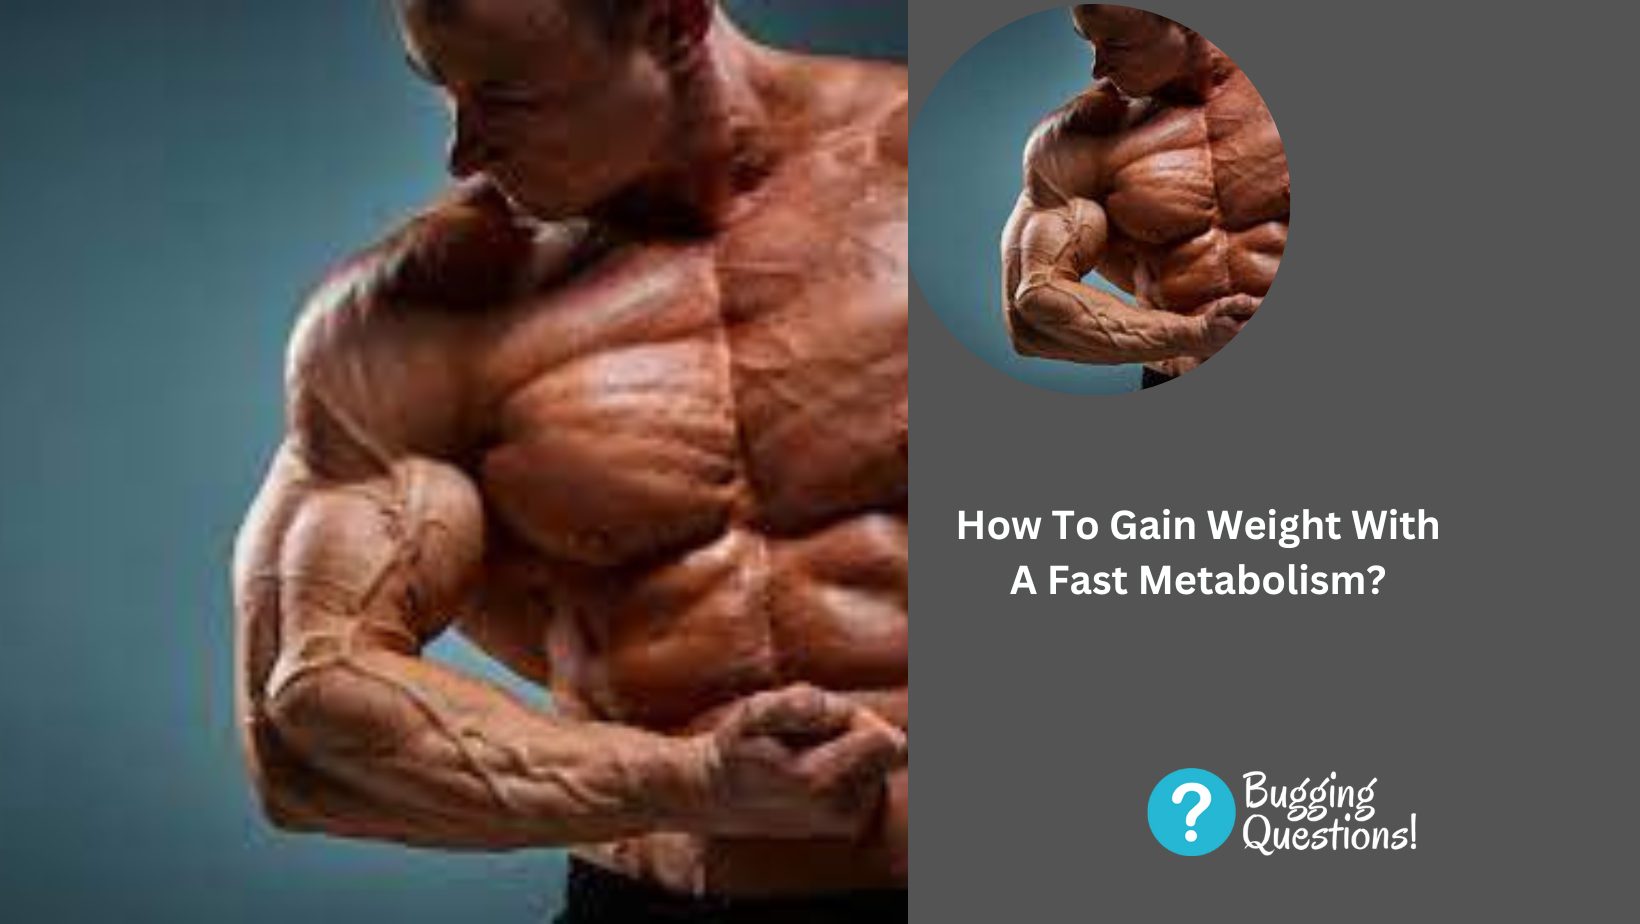 How To Gain Weight With A Fast Metabolism? Here Is What To Know